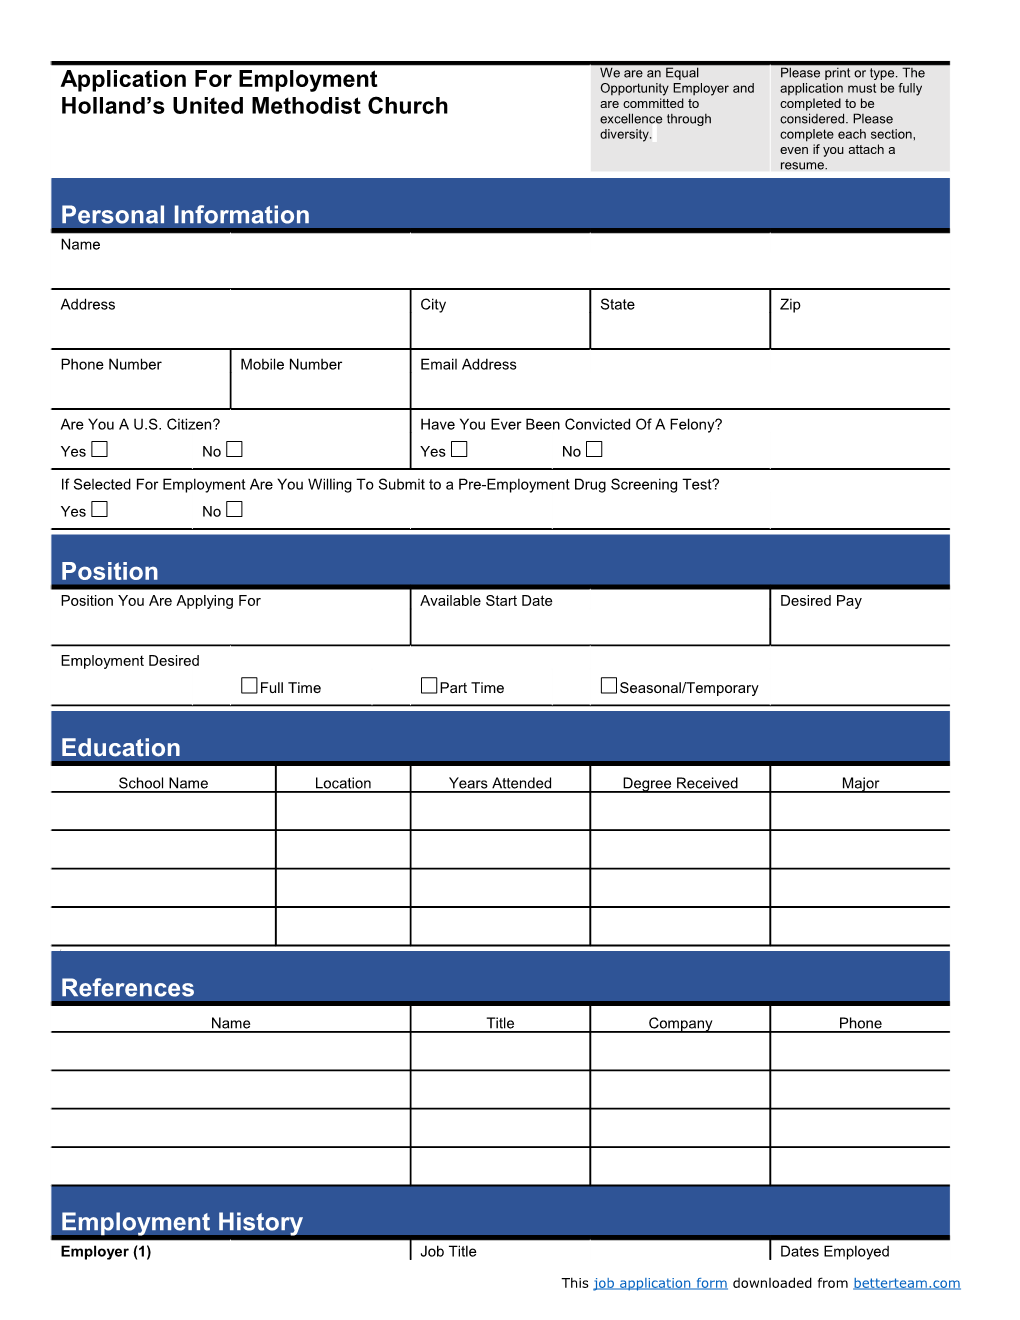 This Job Application Form Downloaded from Betterteam.Com